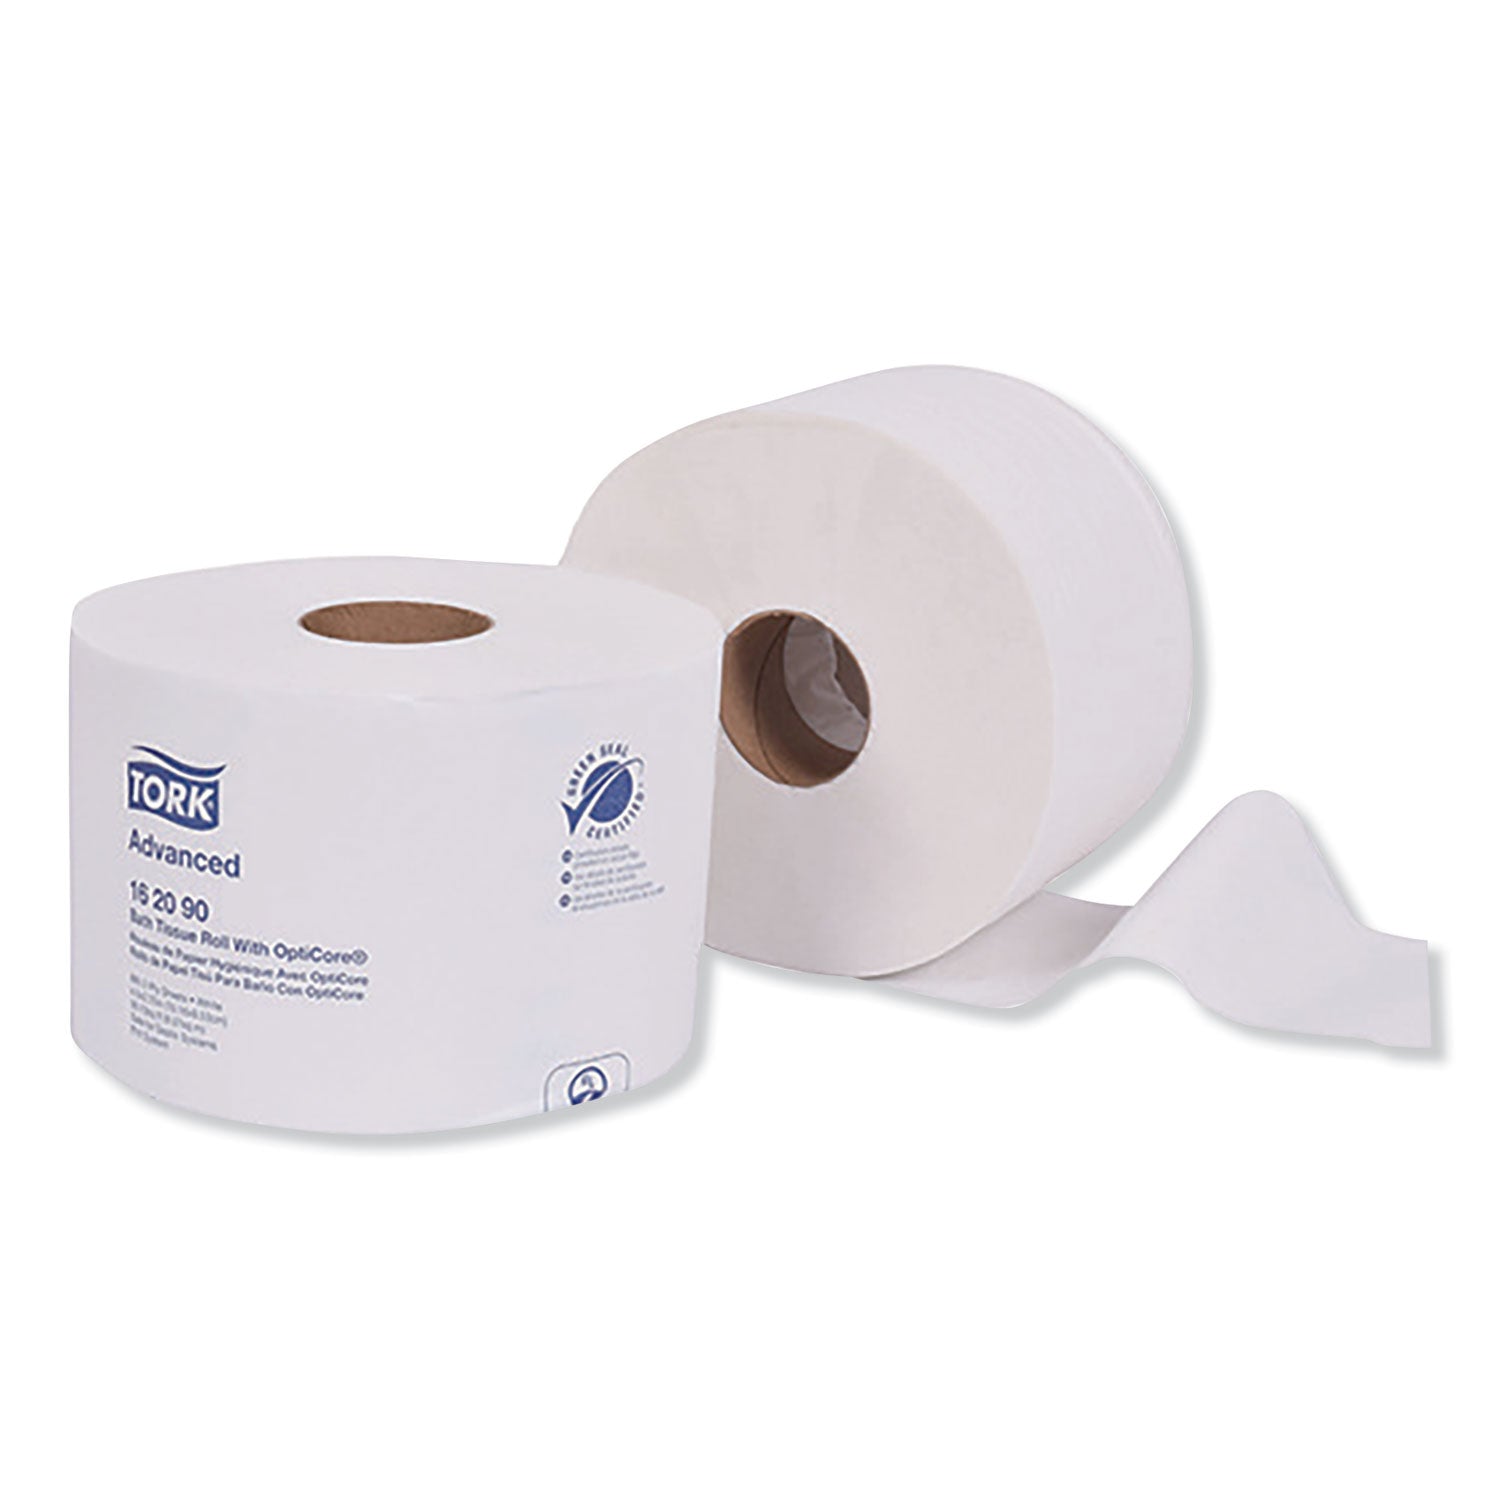 advanced-bath-tissue-roll-with-opticore-septic-safe-2-ply-white-865-sheets-roll-36-carton_trk162090 - 1